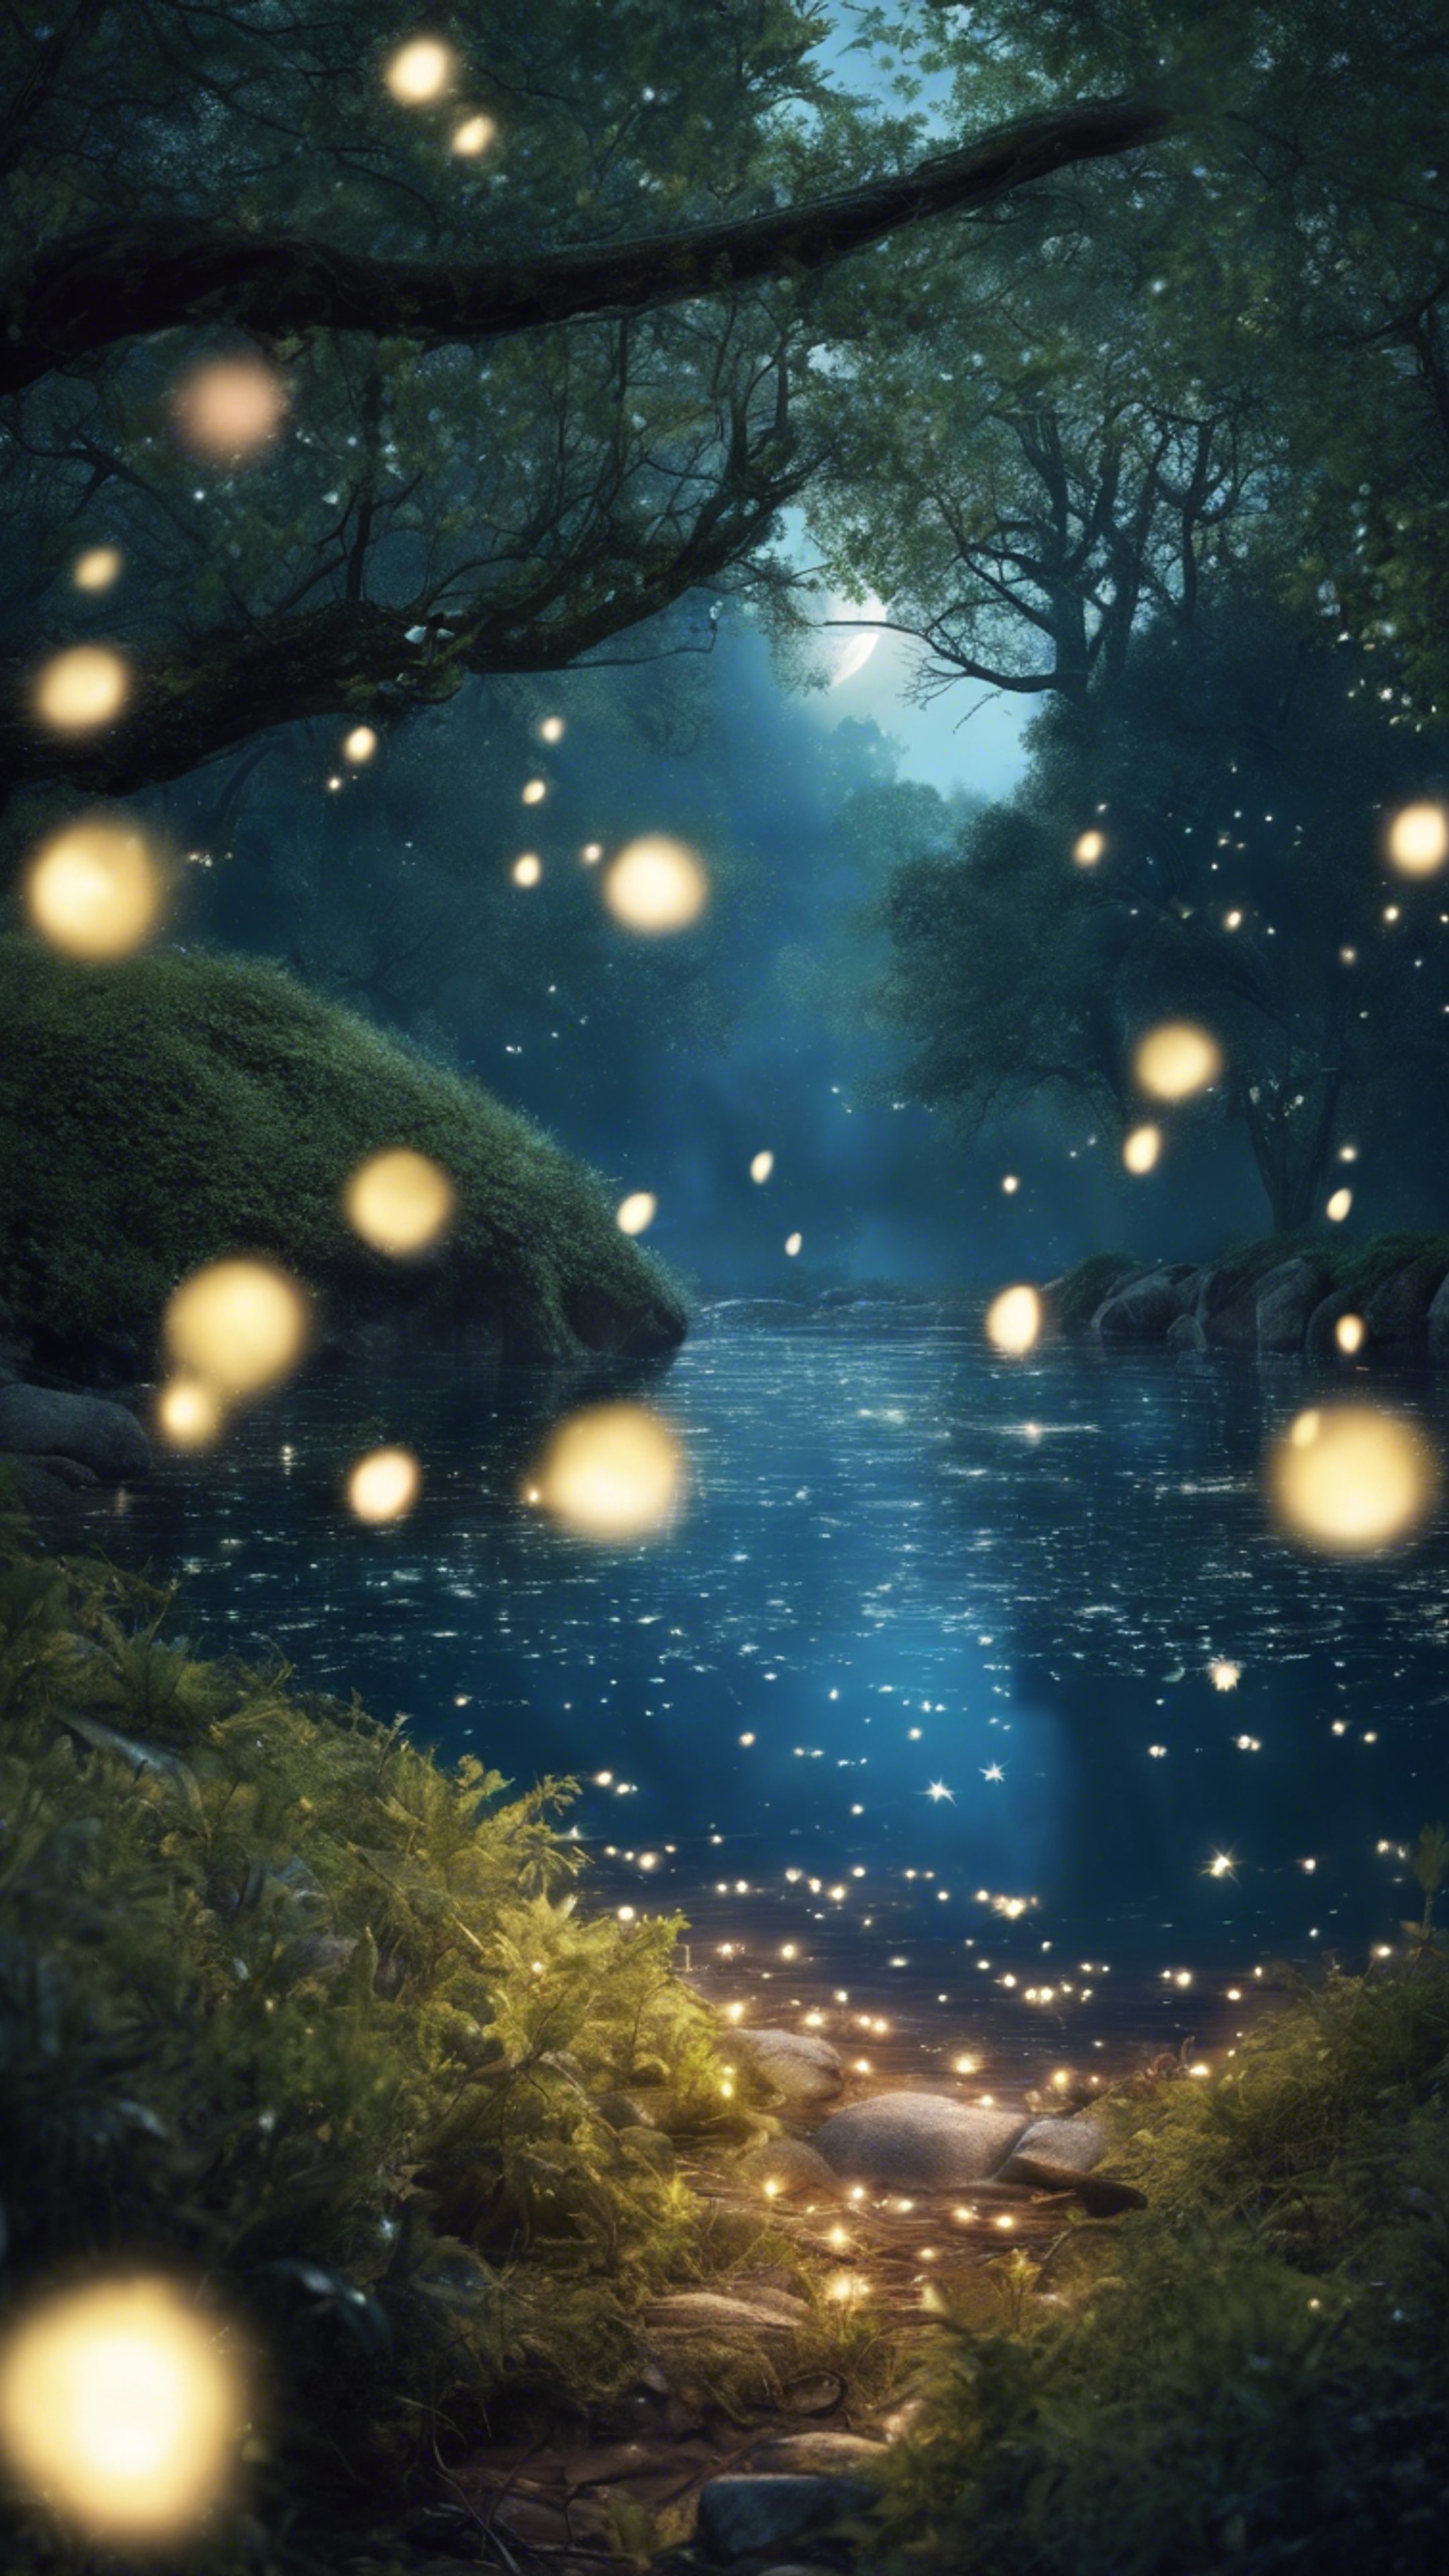 An enchanted forest lit up by midnight blue fireflies, with a river gleaming under the silver moon. Ფონი[9c93675377644e8e8e21]